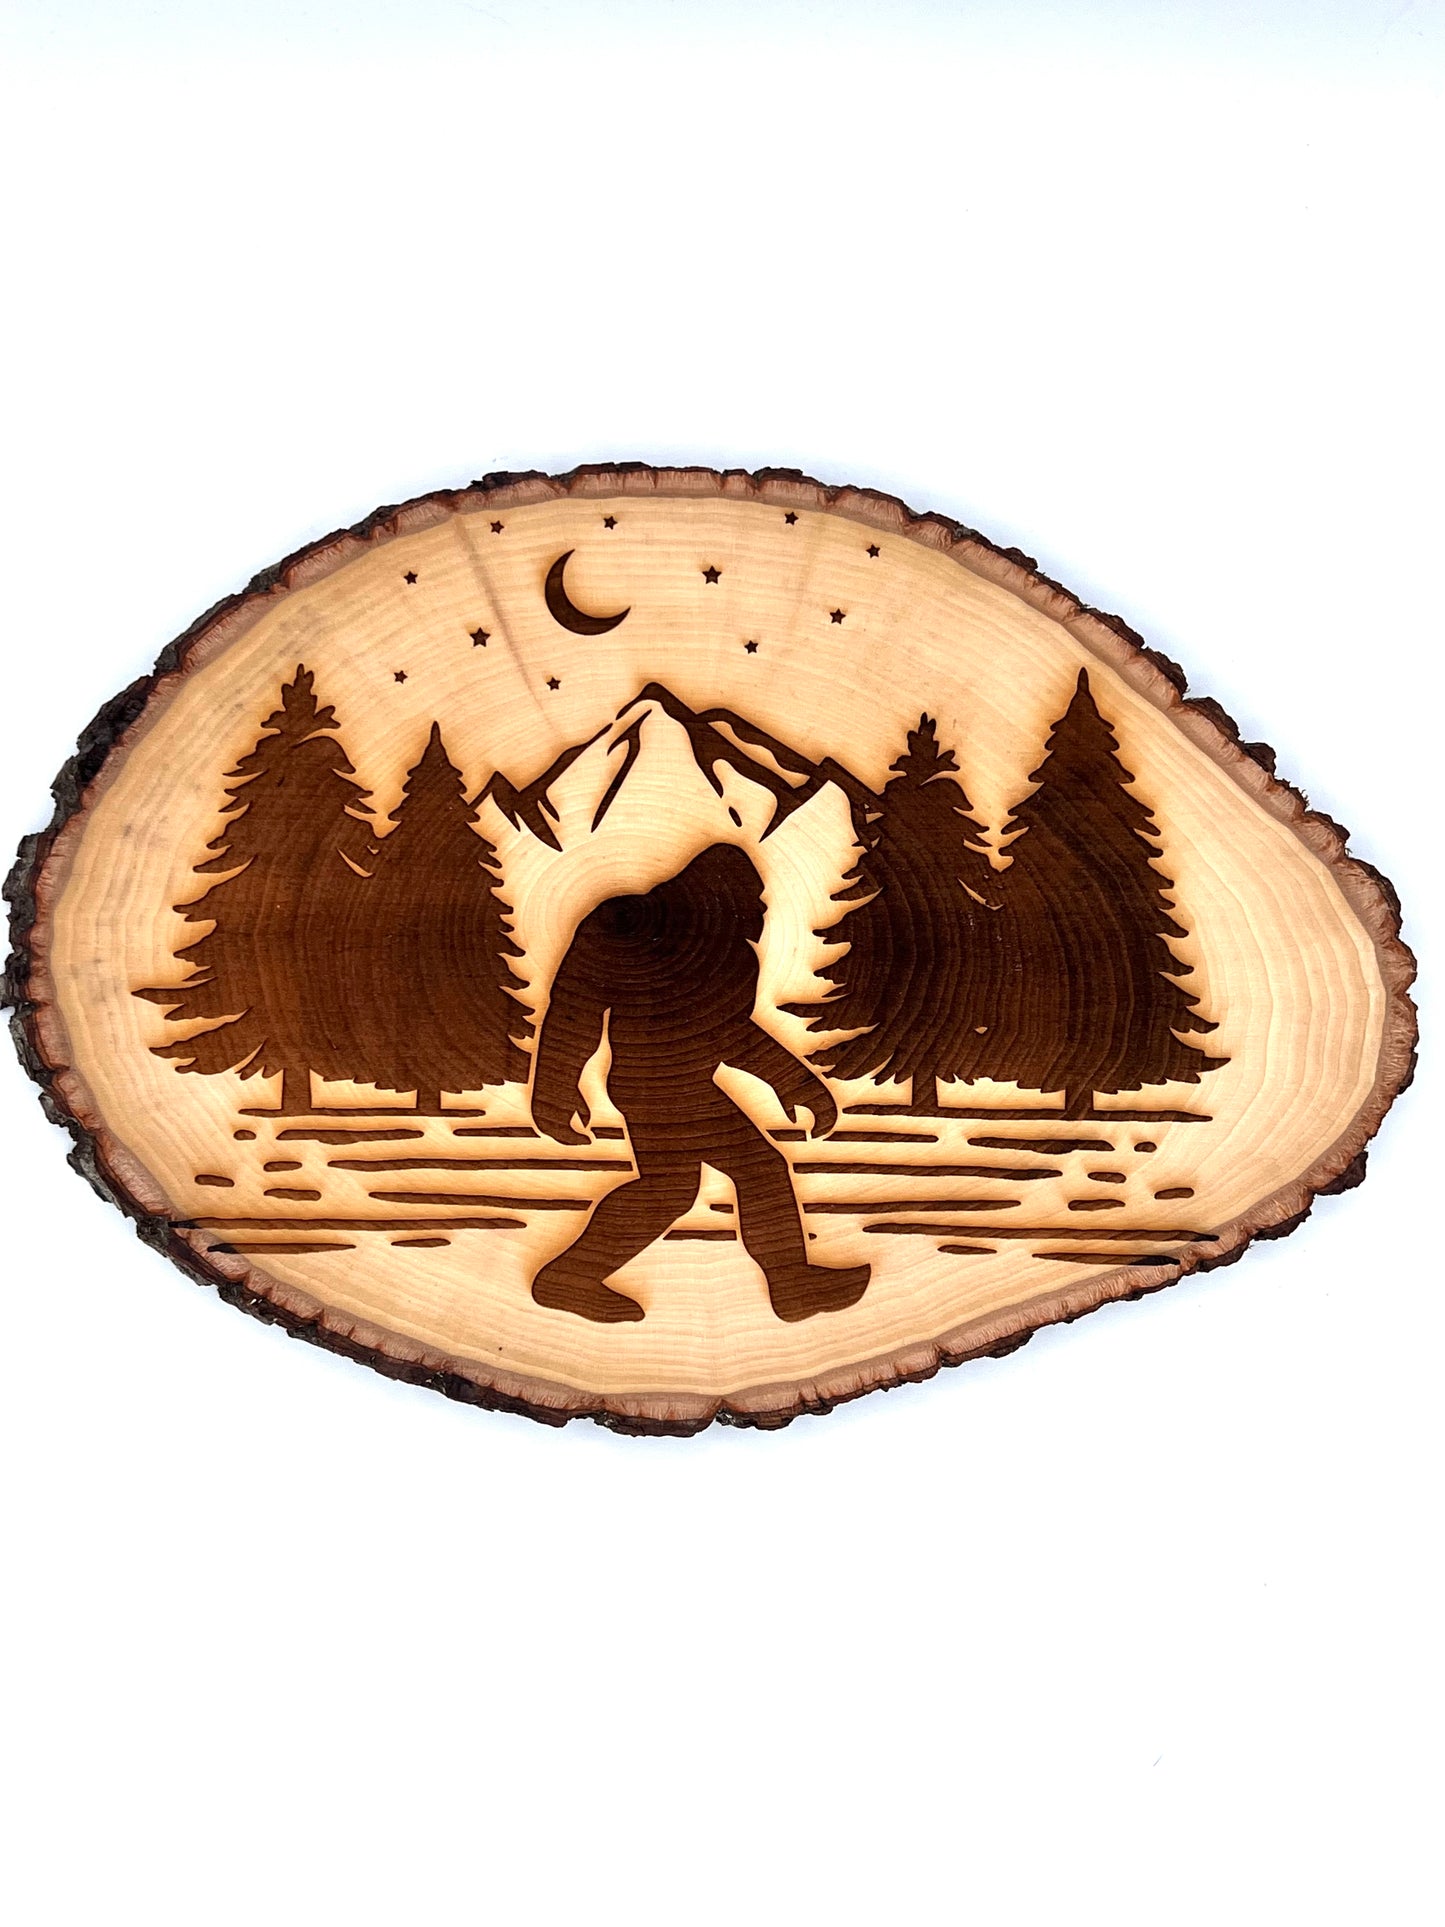 Bigfoot Sasquatch Walking in the Woods Engraved on Round Wood with Bark Edges